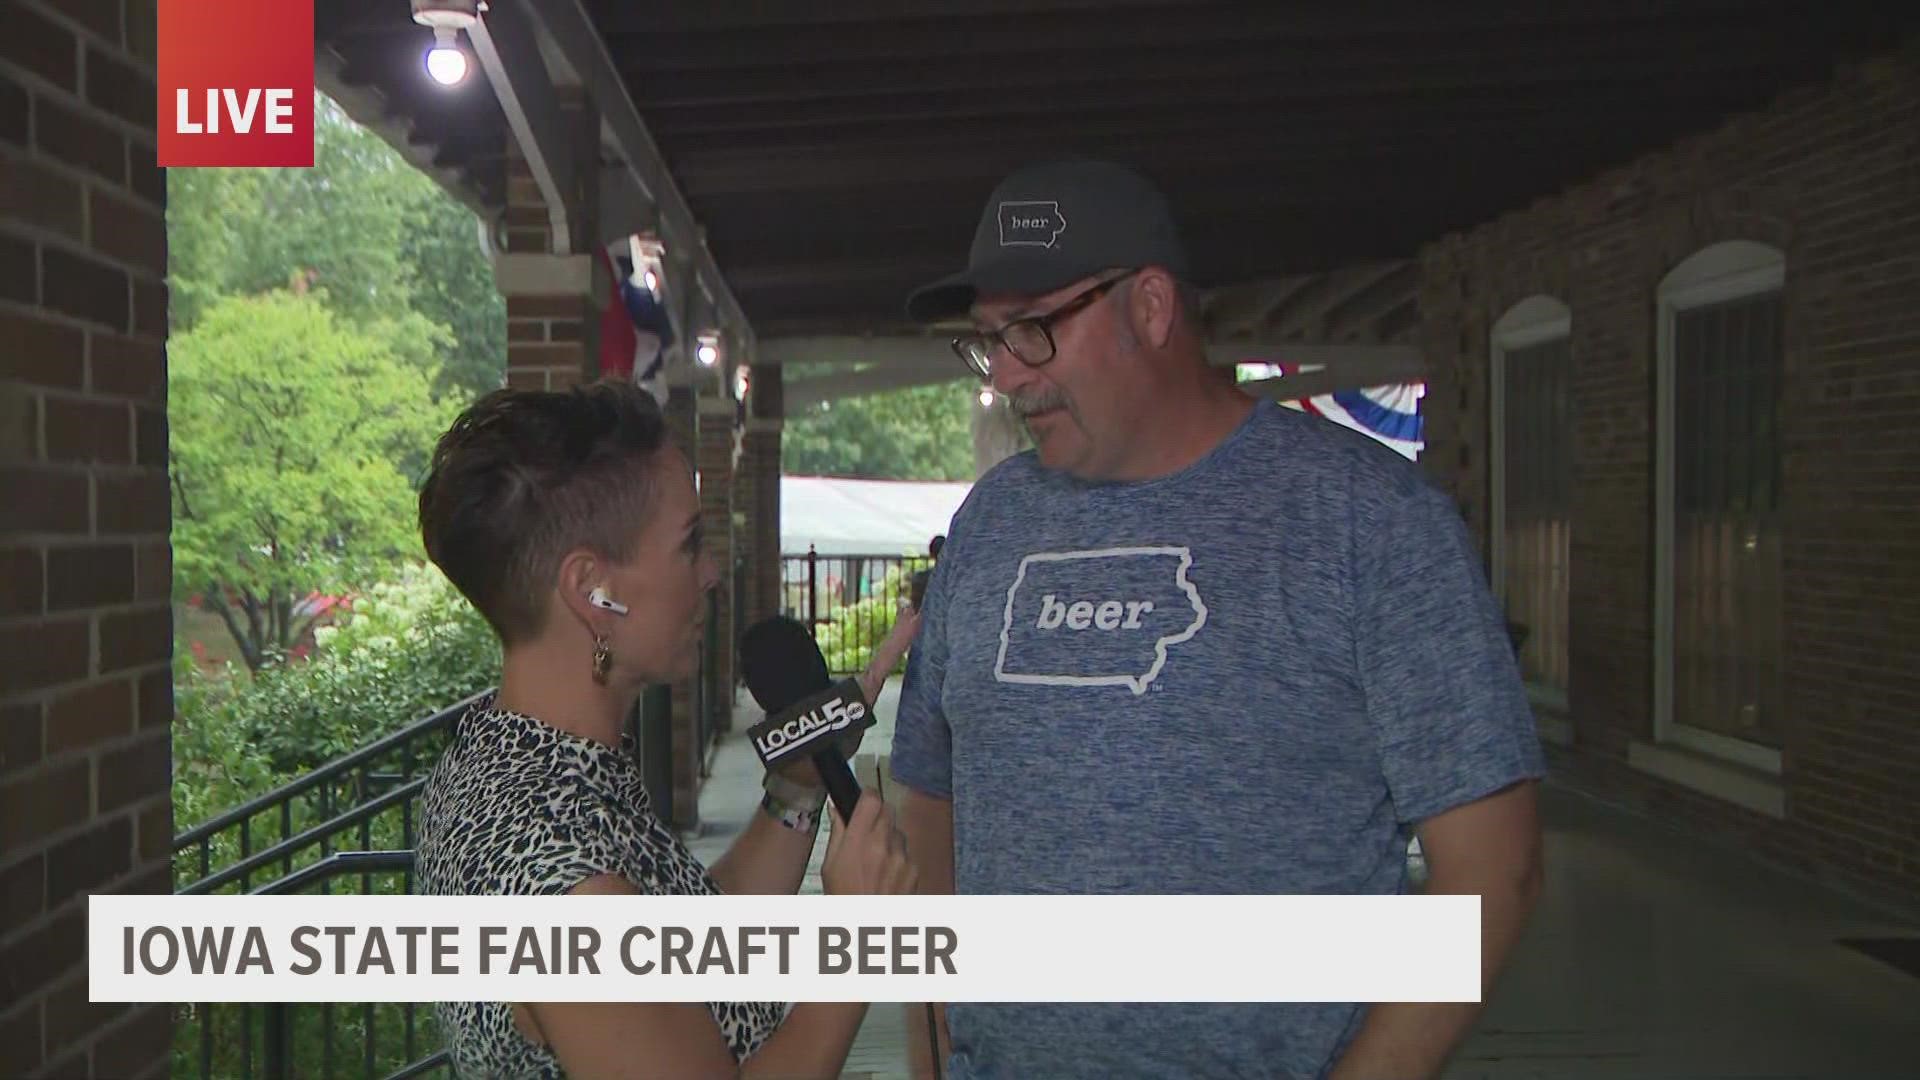 Iowa Craft Beer is located just West of the Richard O. Jacobson Exhibition Center for its 11th year at the fair.